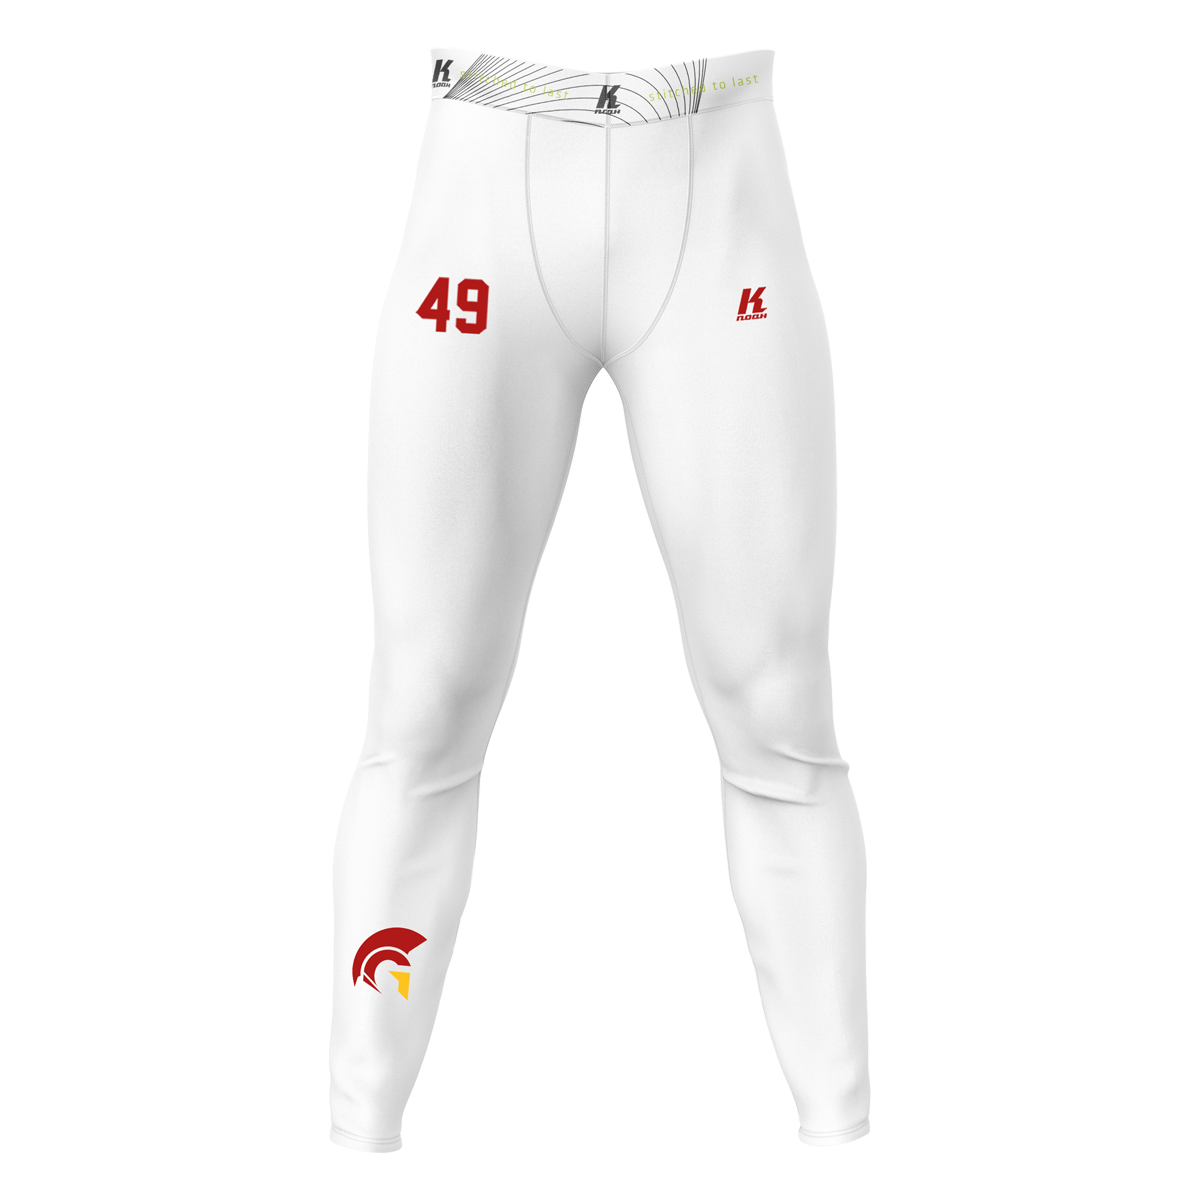 Gladiators K.Tech Compression Pant BA0514 with Playernumber/Initials